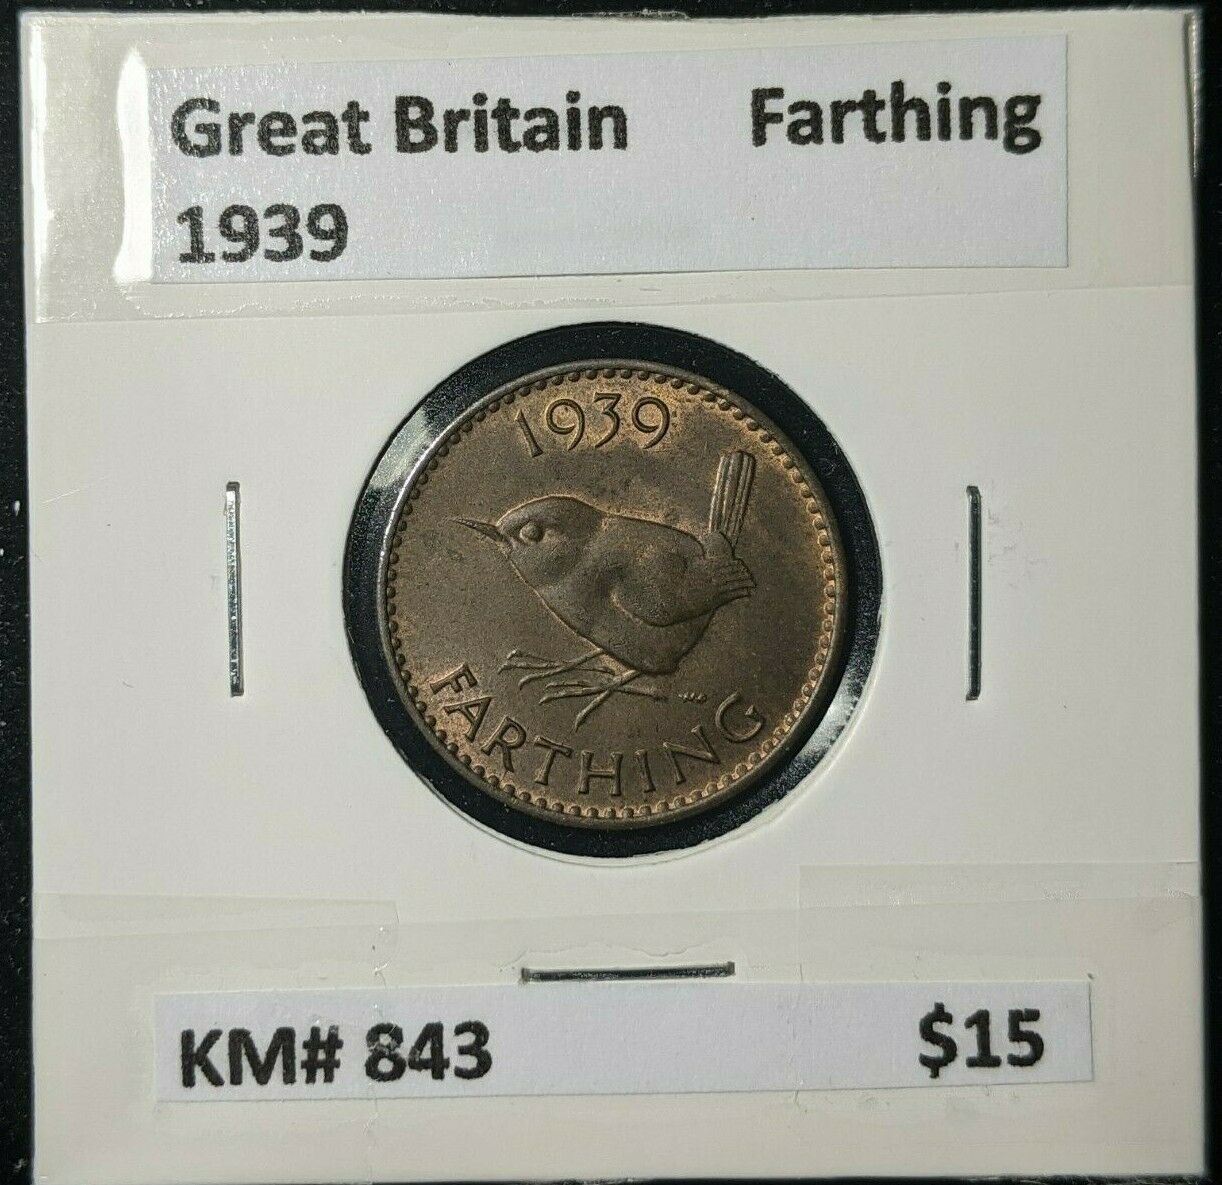 Great Britain 1939 1/4d Farthing KM# 843 #027